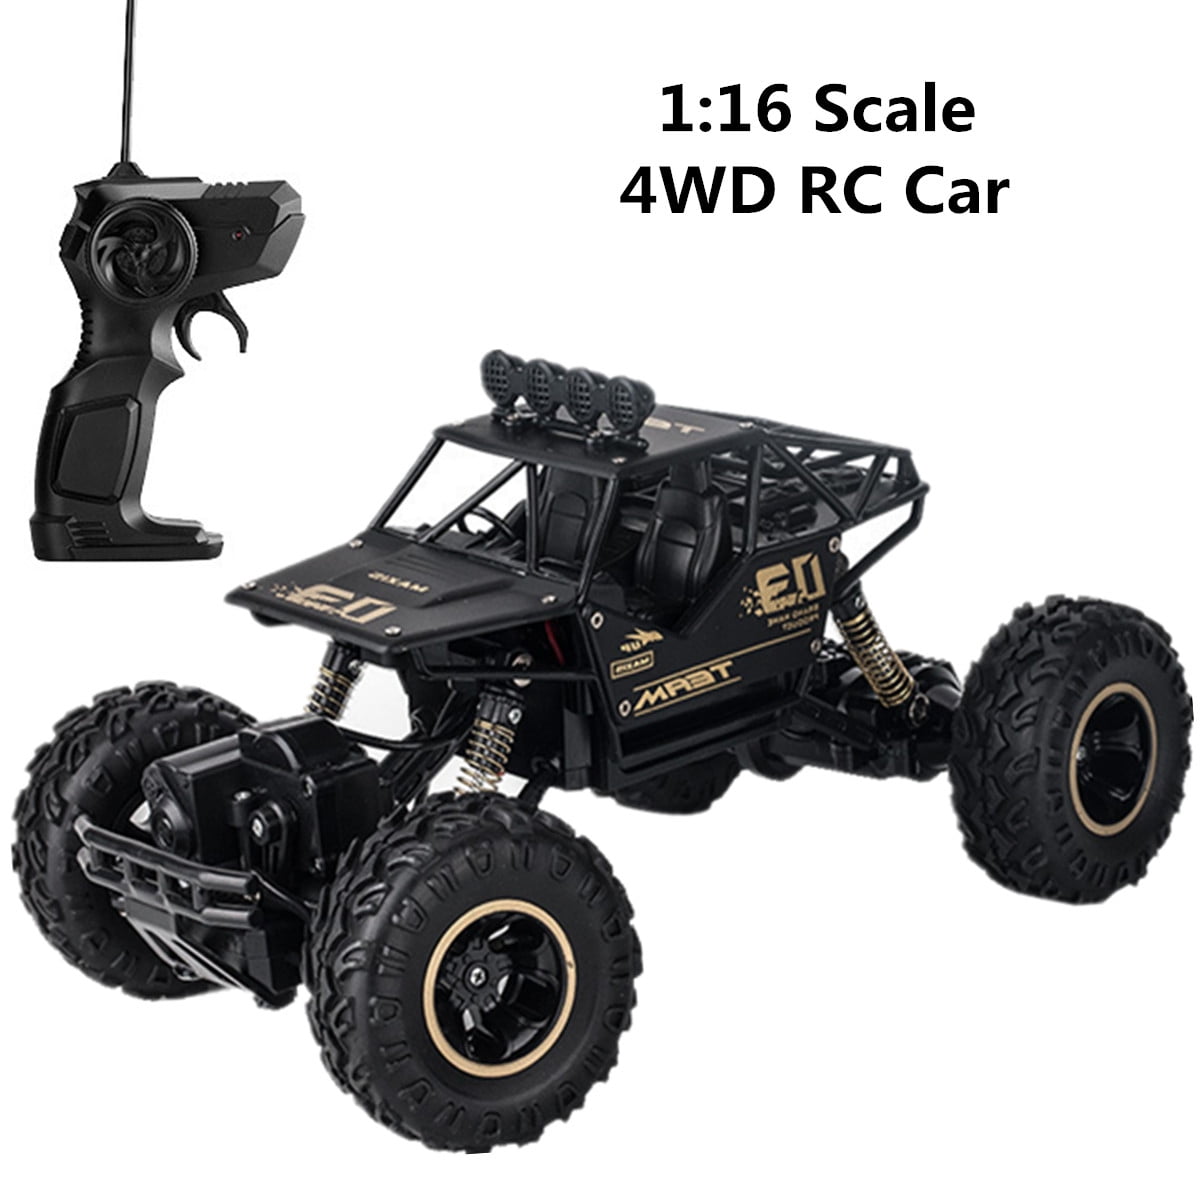 1/16 Scale 4WD Off-Road Vehicle Alloy 2.4GHz Remote Control Buggy Crawler Car e